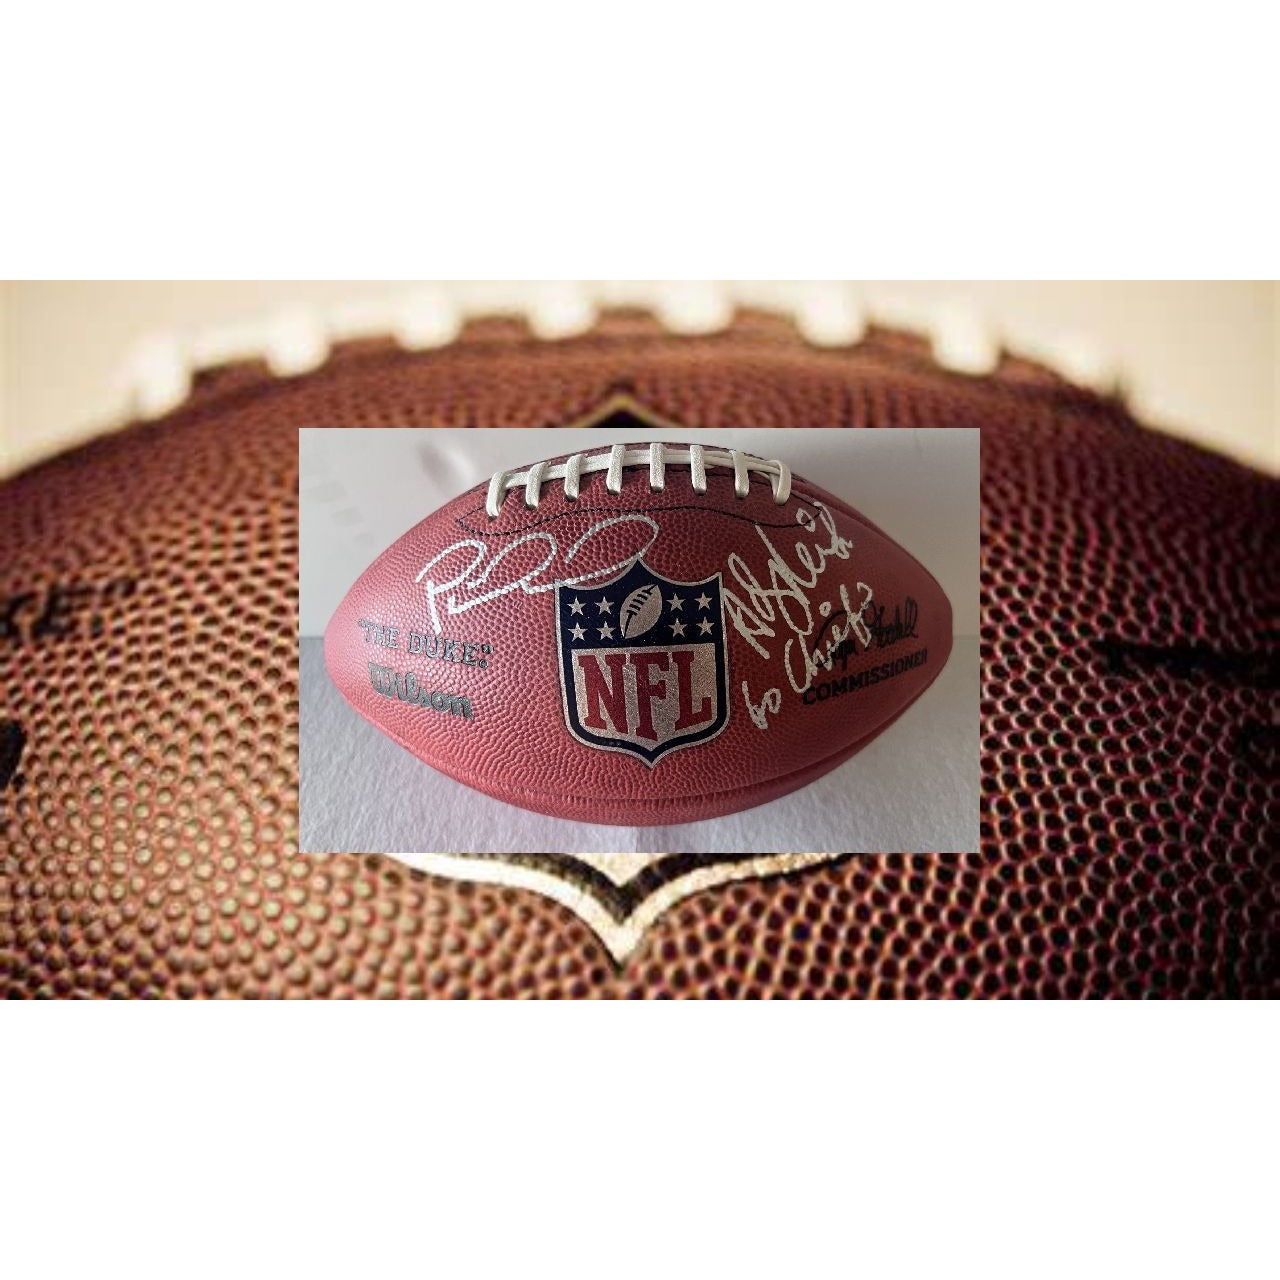 Patrick Mahomes and Andy Reid NFL game football signed with proof